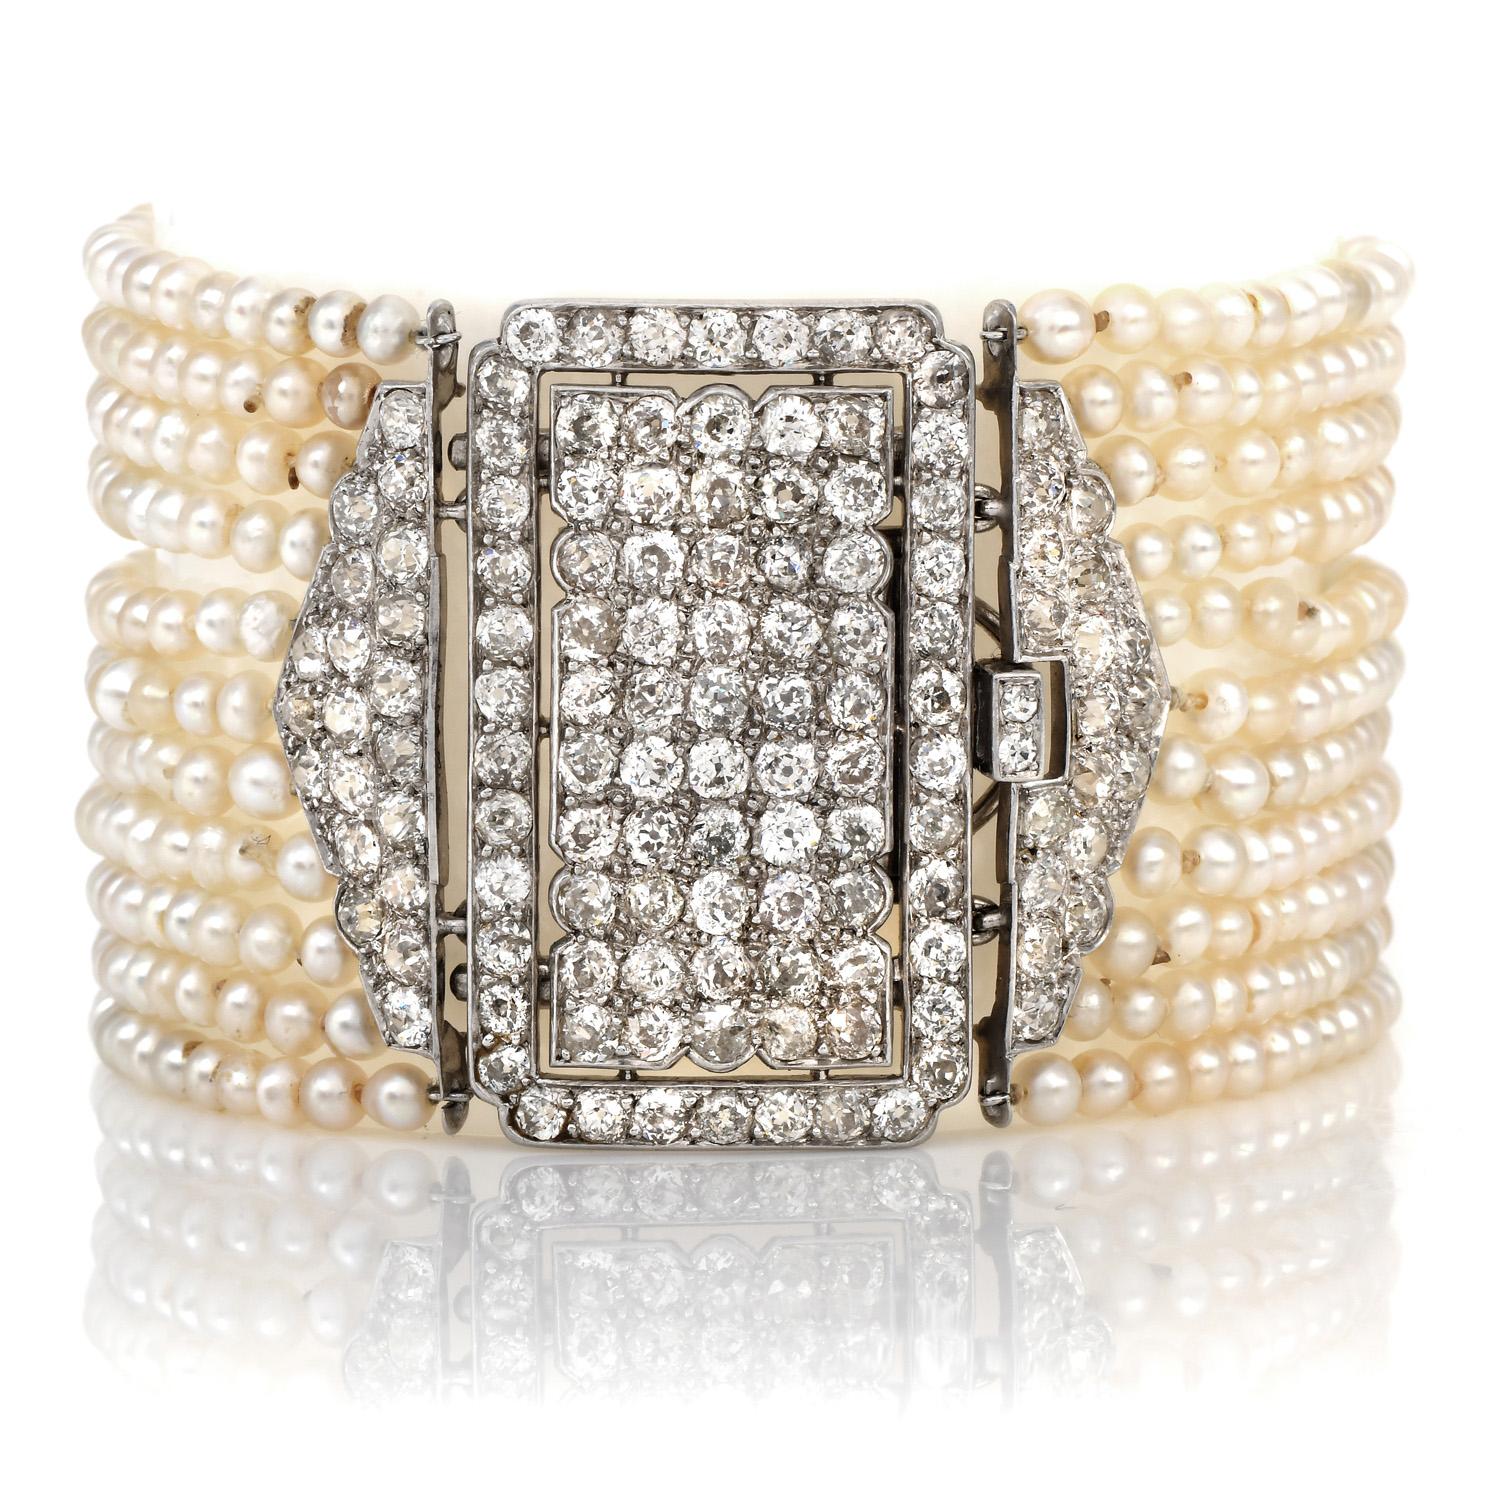 An antique masterpiece from the house of Cartier.

This vintage Diamond and Multistrand Pearl Bracelet is inspired by an extraordinary victorian style and crafted in luxurious Platinum. This bracelet offers a subtle accent to complete any pearl